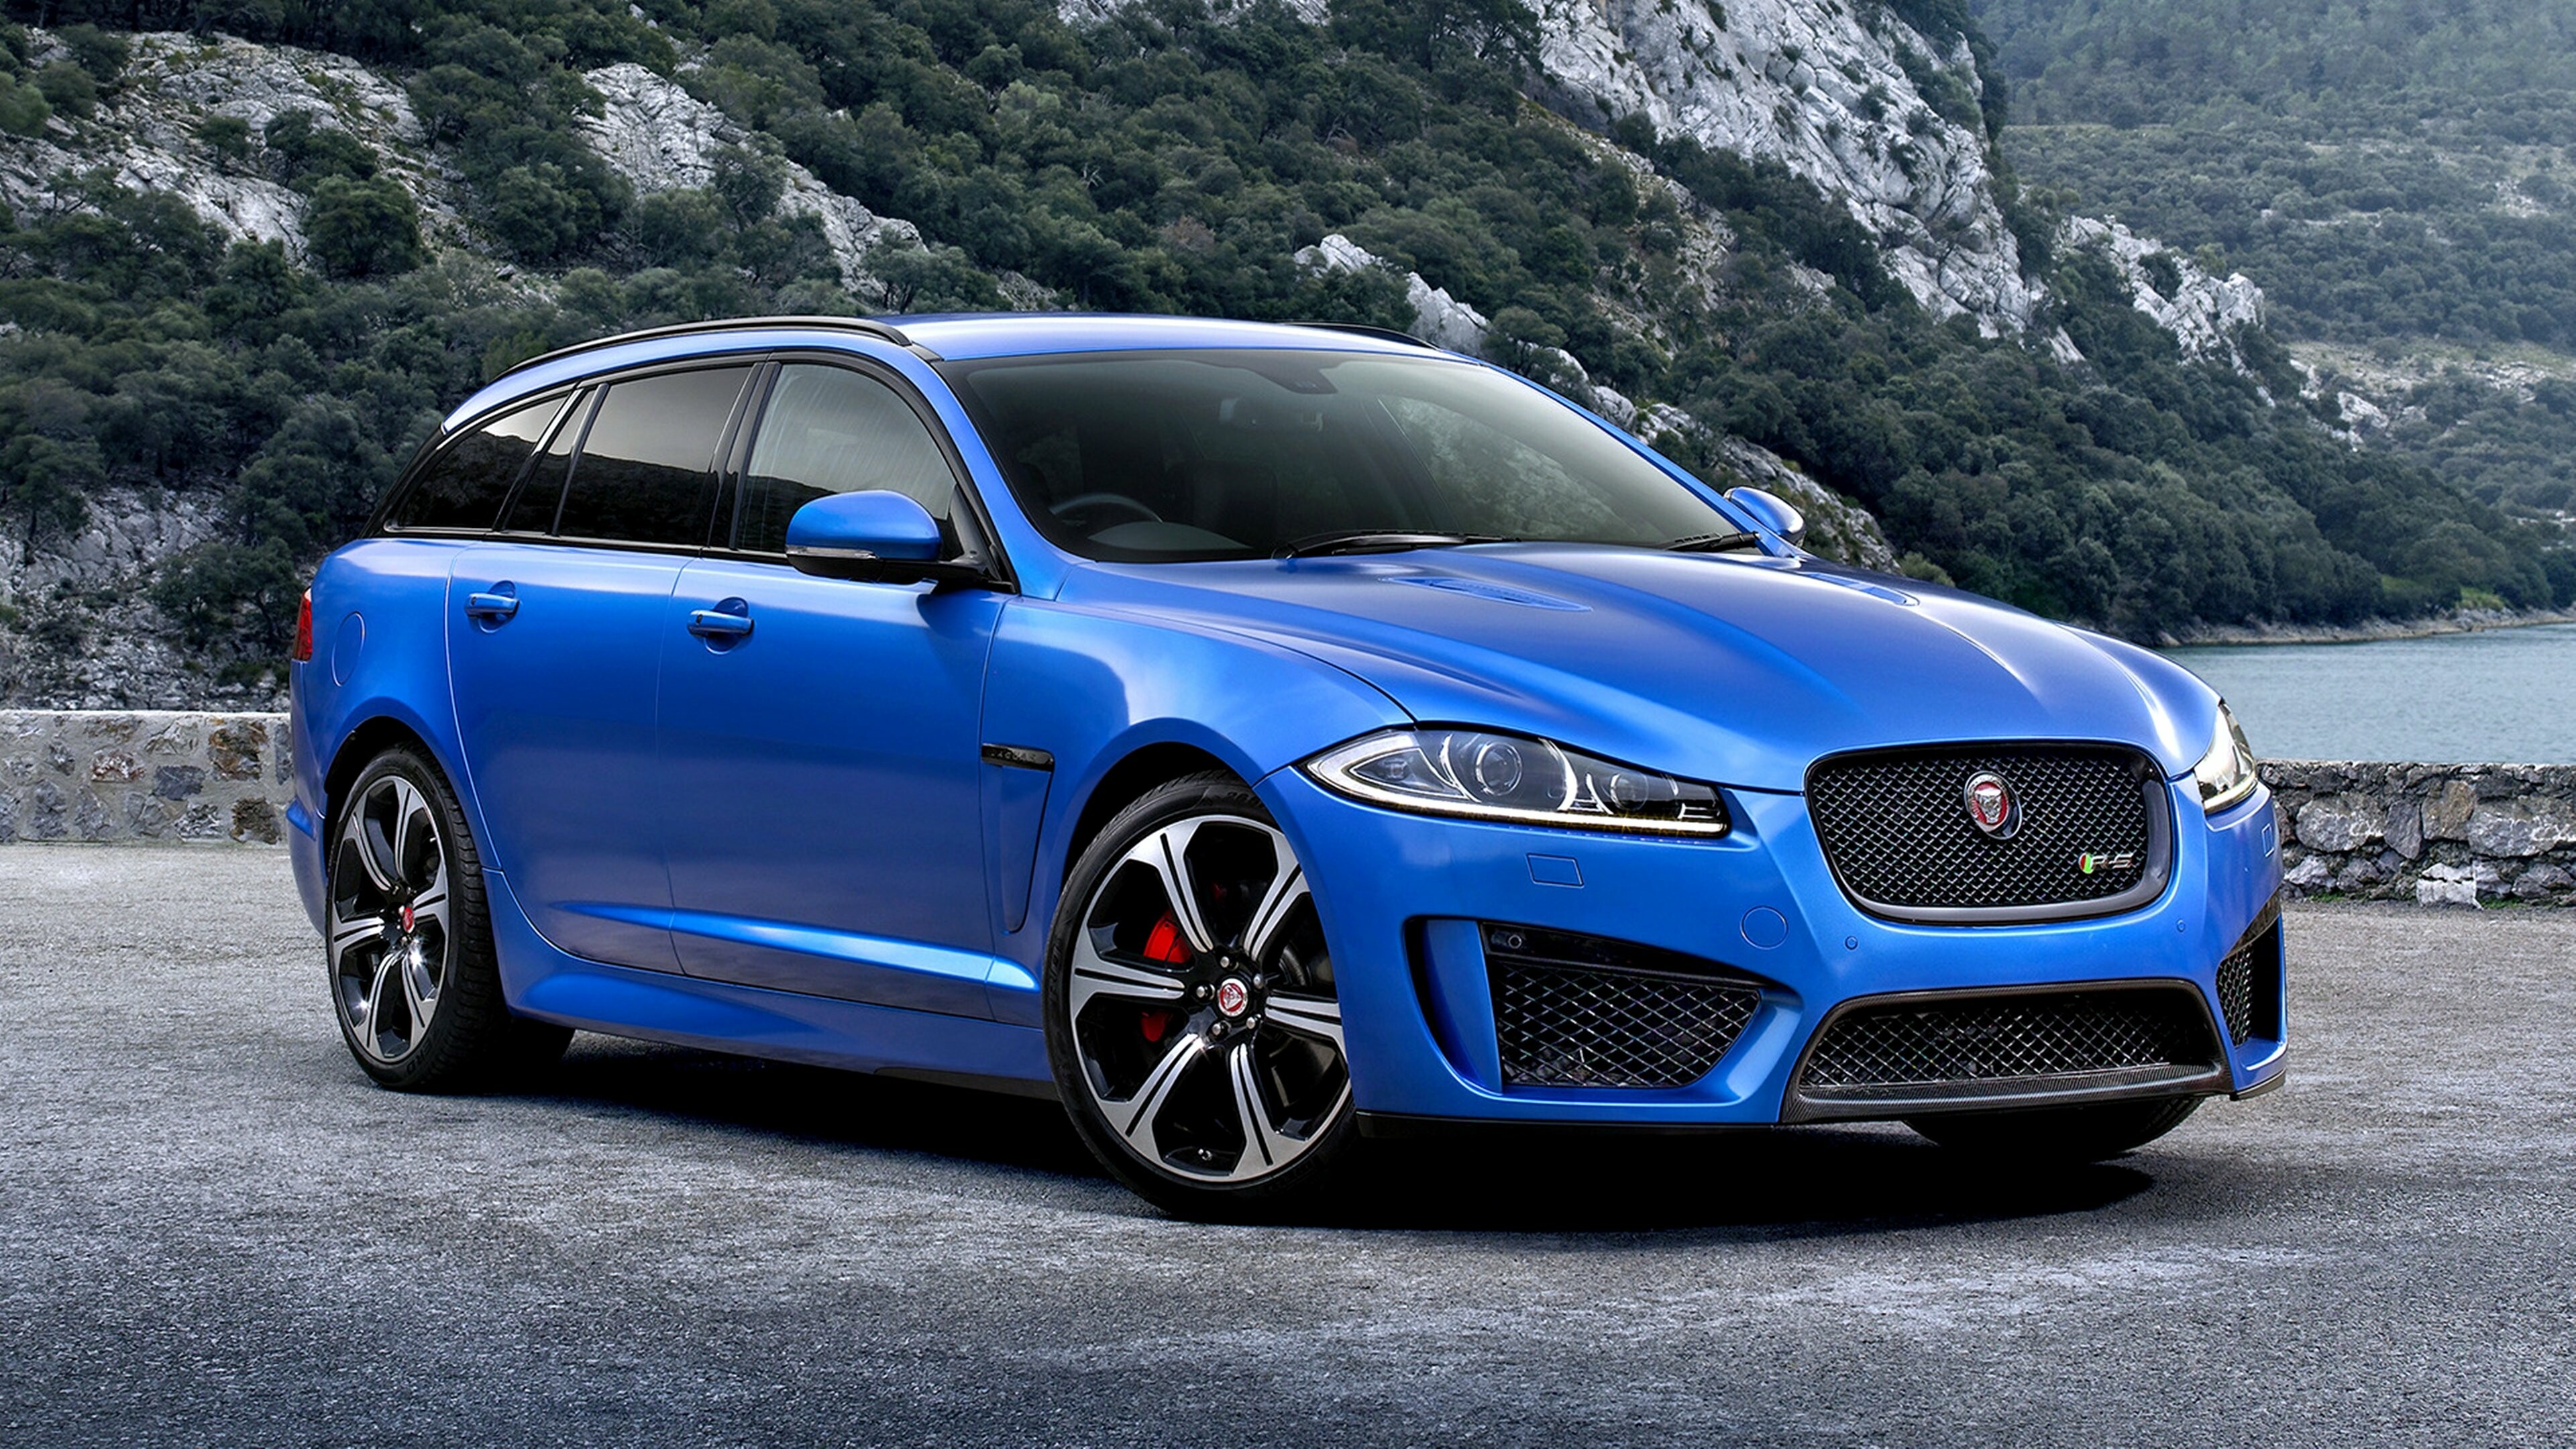 Jaguar Cars: Purchased in 2008 by Tata Motors and fully joined into JLR Limited in 2013, XFR Sportbrake. 3840x2160 4K Wallpaper.